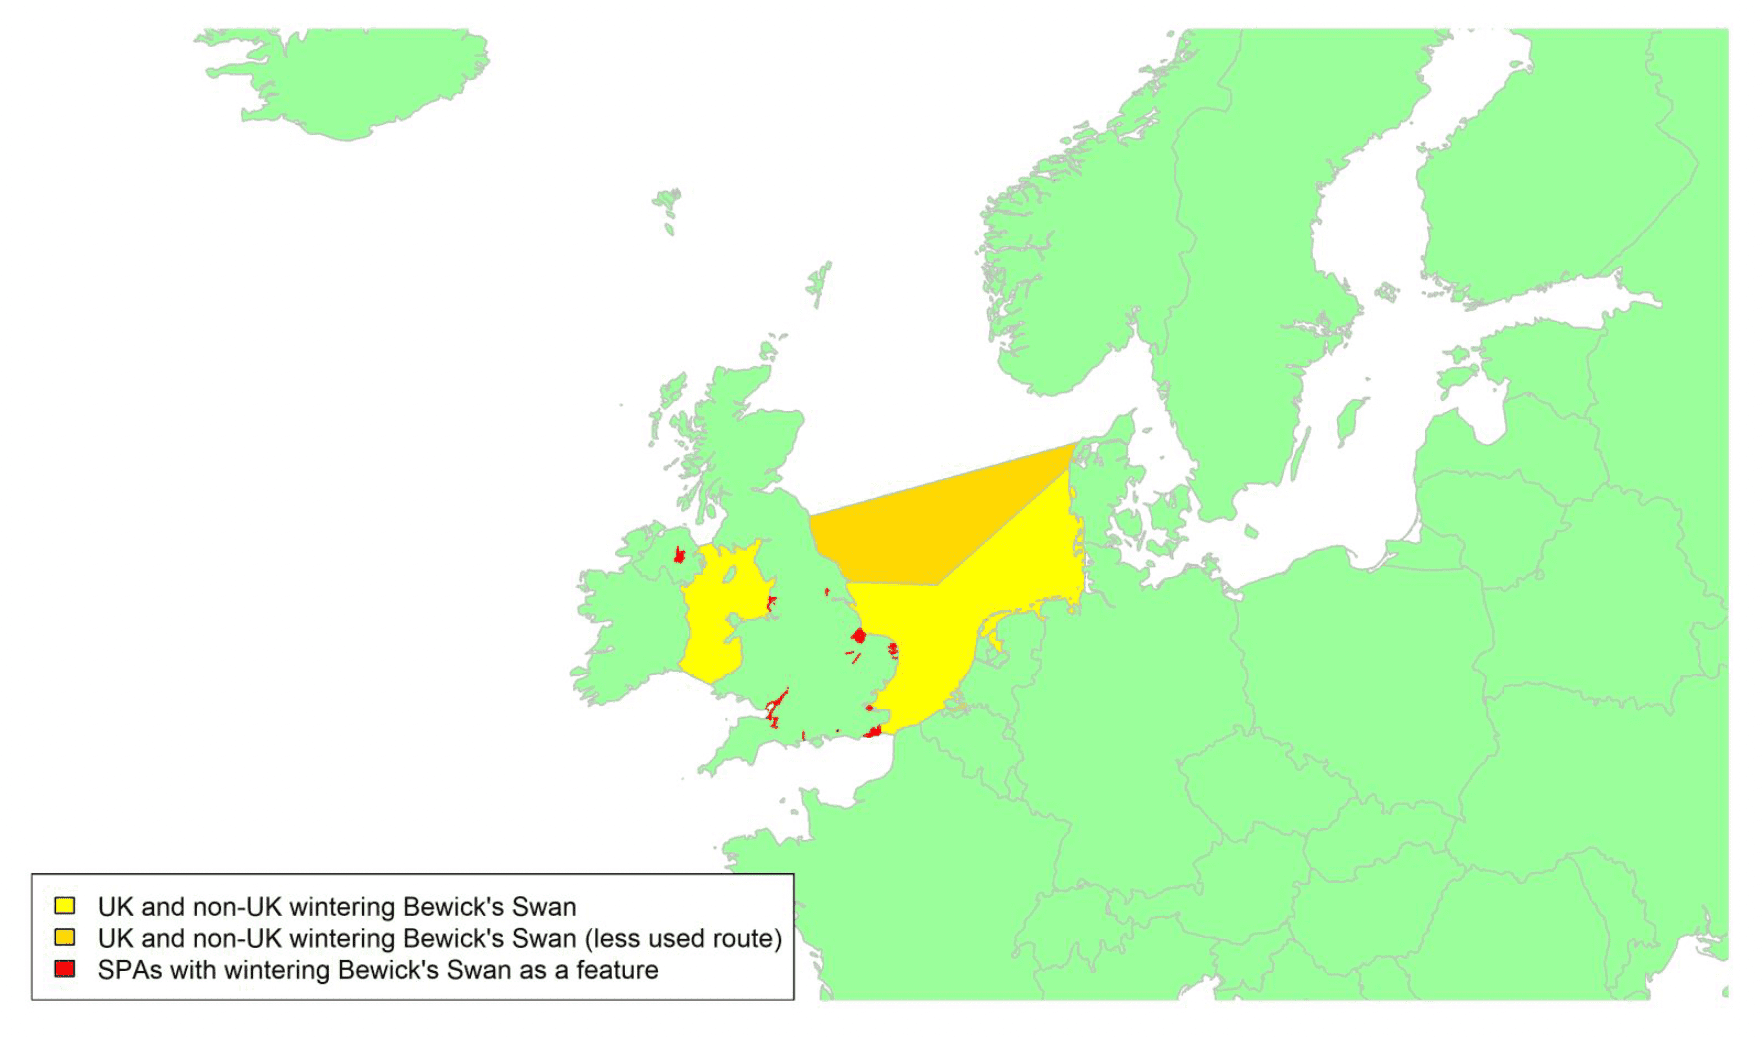 Map of North West Europe showing migratory routes and SPAs within the UK for Bewick's Swan as described in the text below.